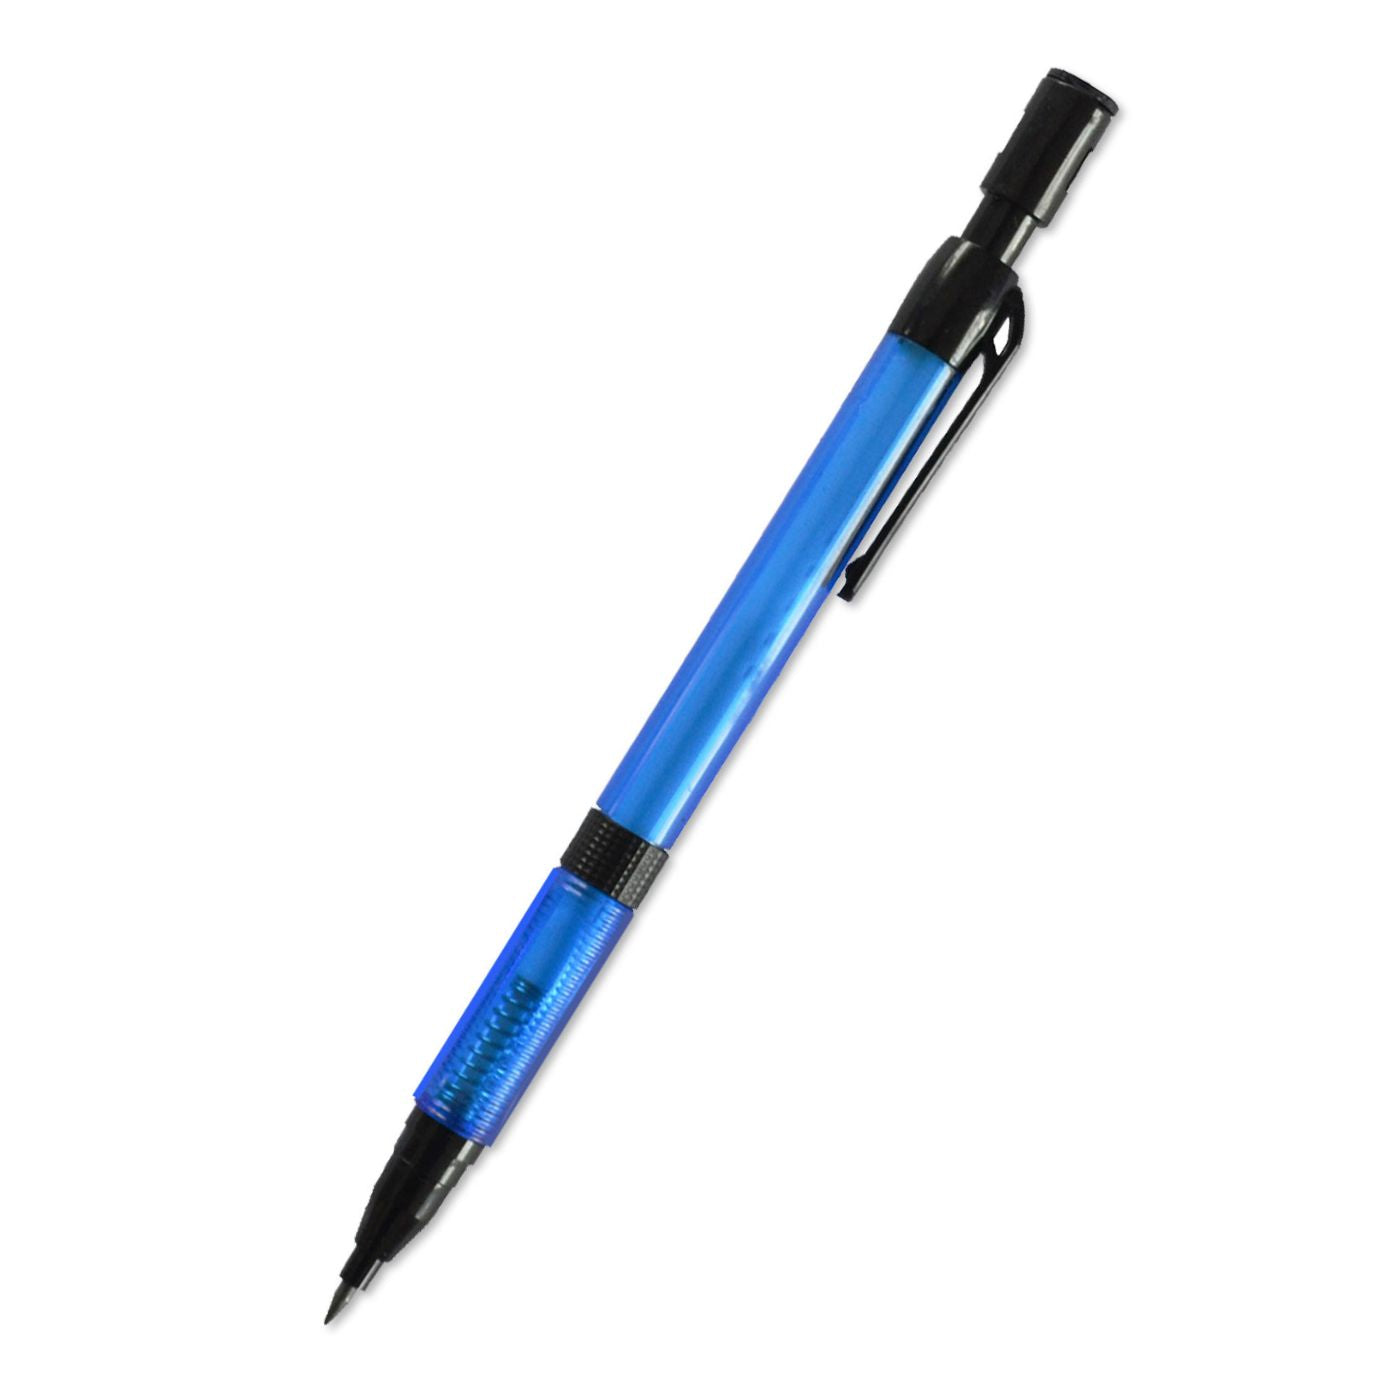 Tyco Triangular HB Mechanical Pencil TY-520 With Lead Sharpener 2.00mm Blue